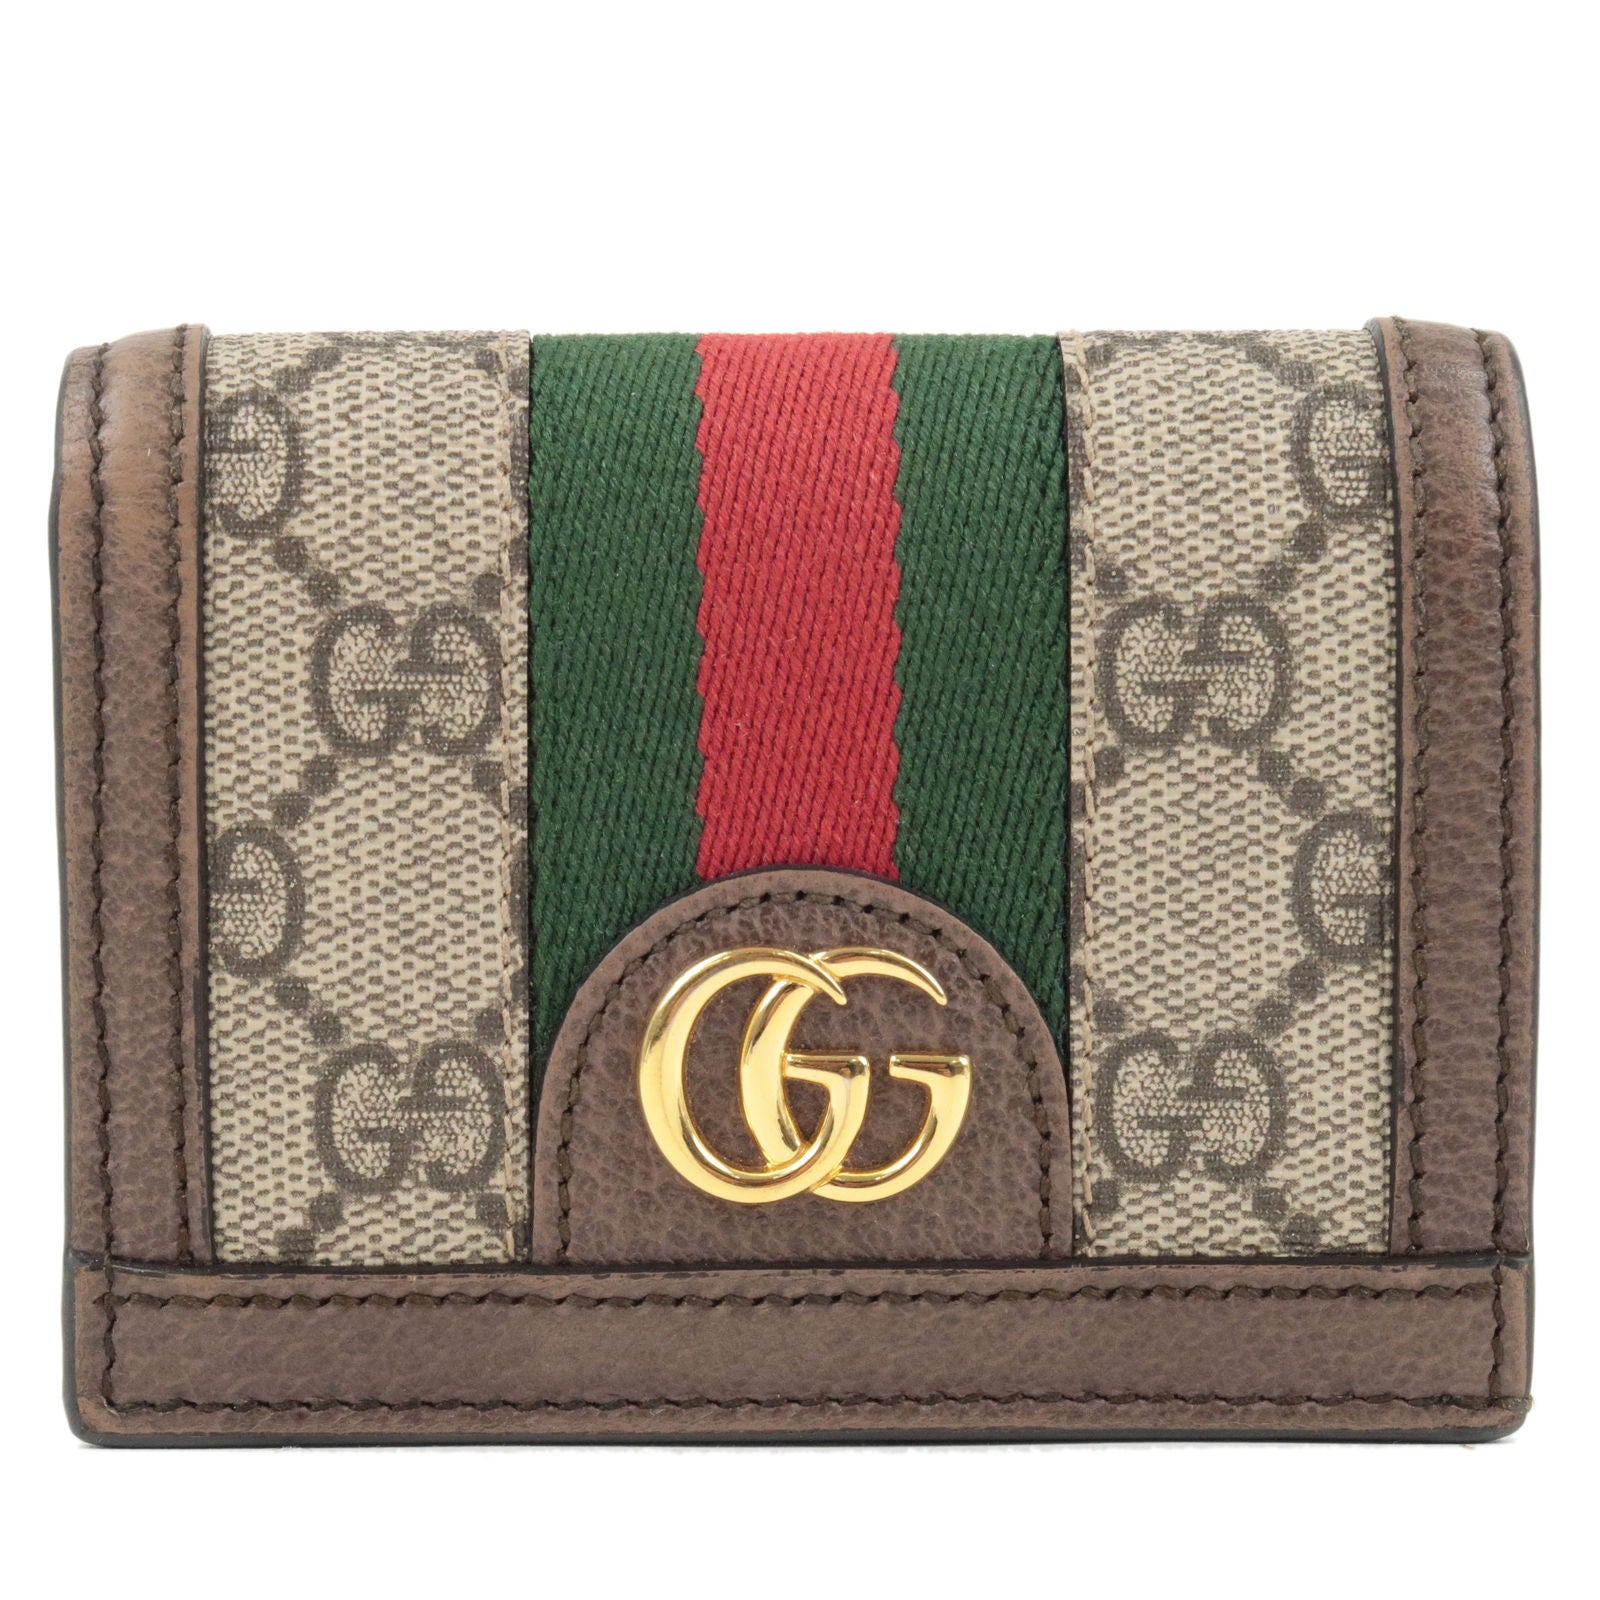 Ophidia GG Leather Wallet in Brown - Gucci